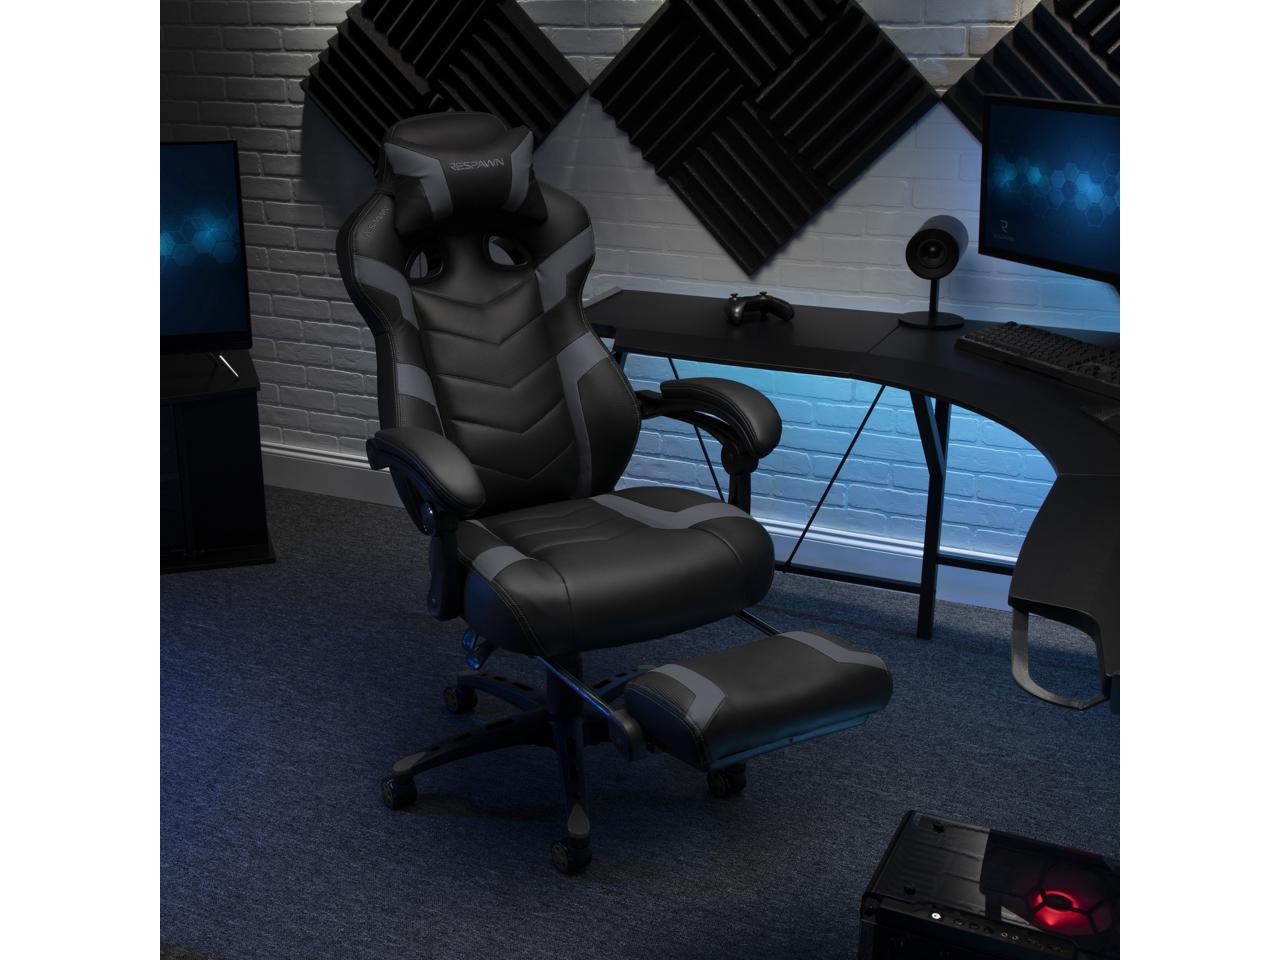 RESPAWN 110 Pro Racing Style Gaming Chair, Reclining